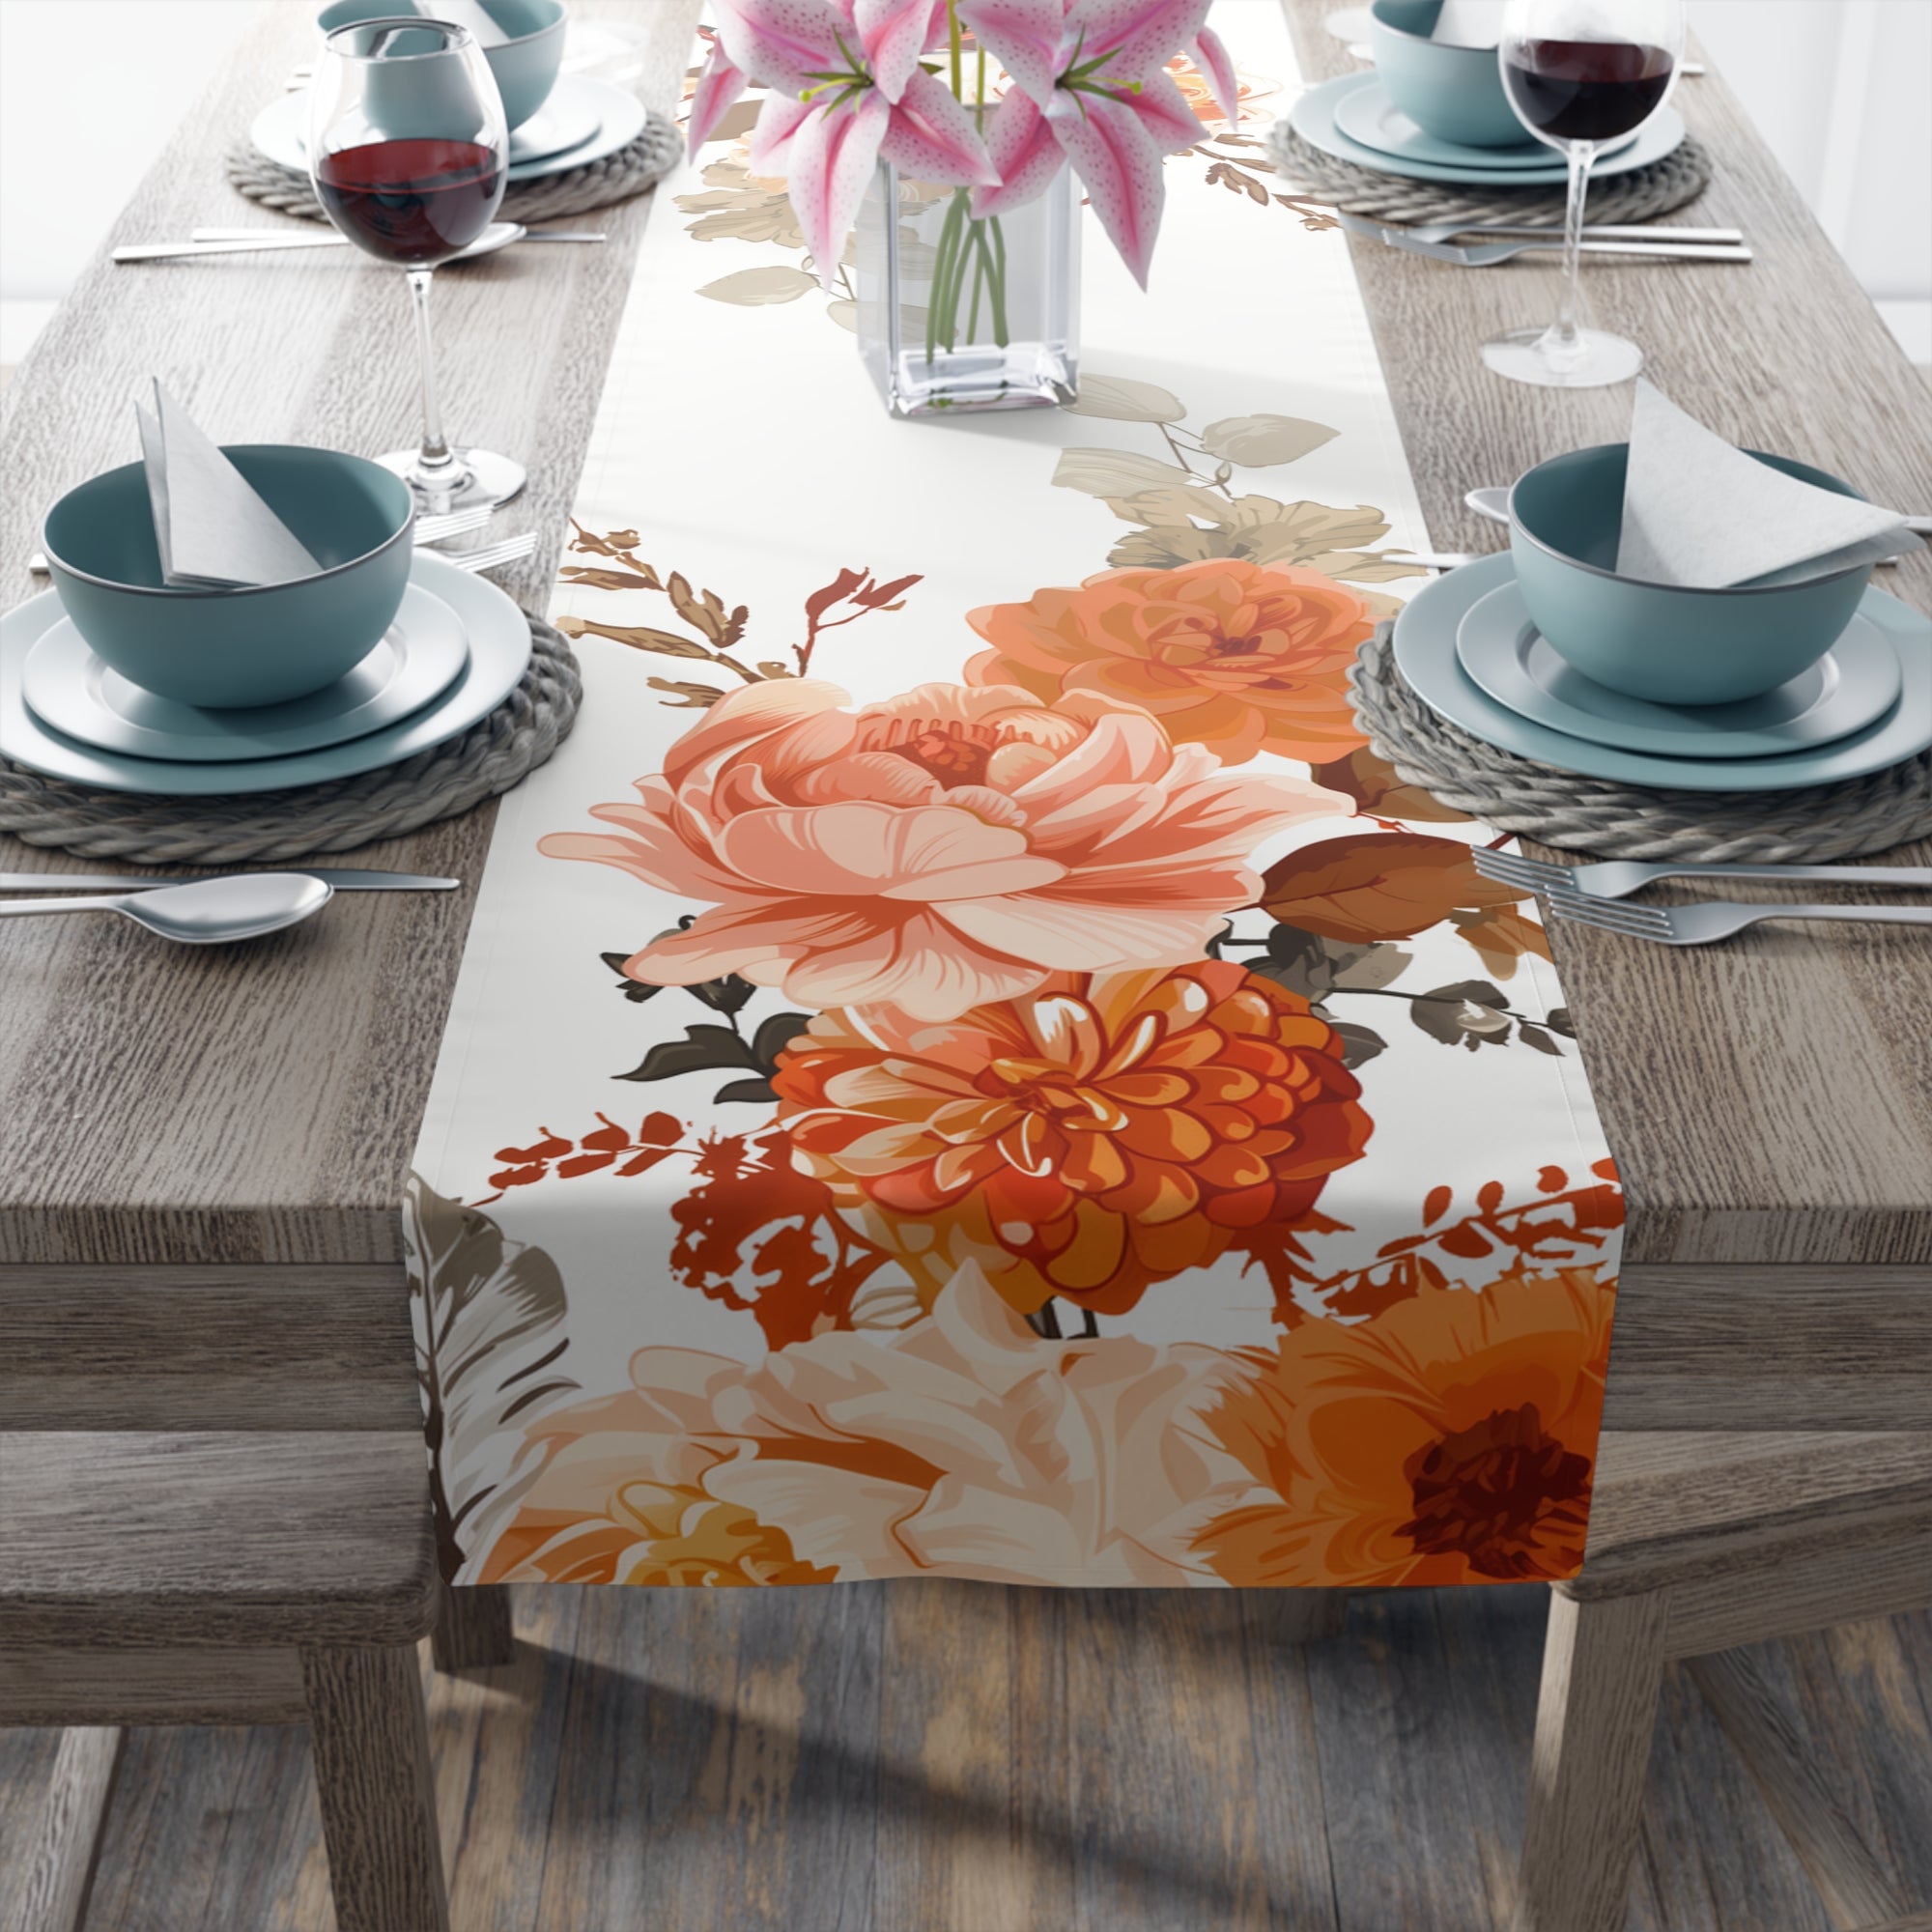 Sunset Table Runner with Orange and Peach Floral Design (16" × 72")